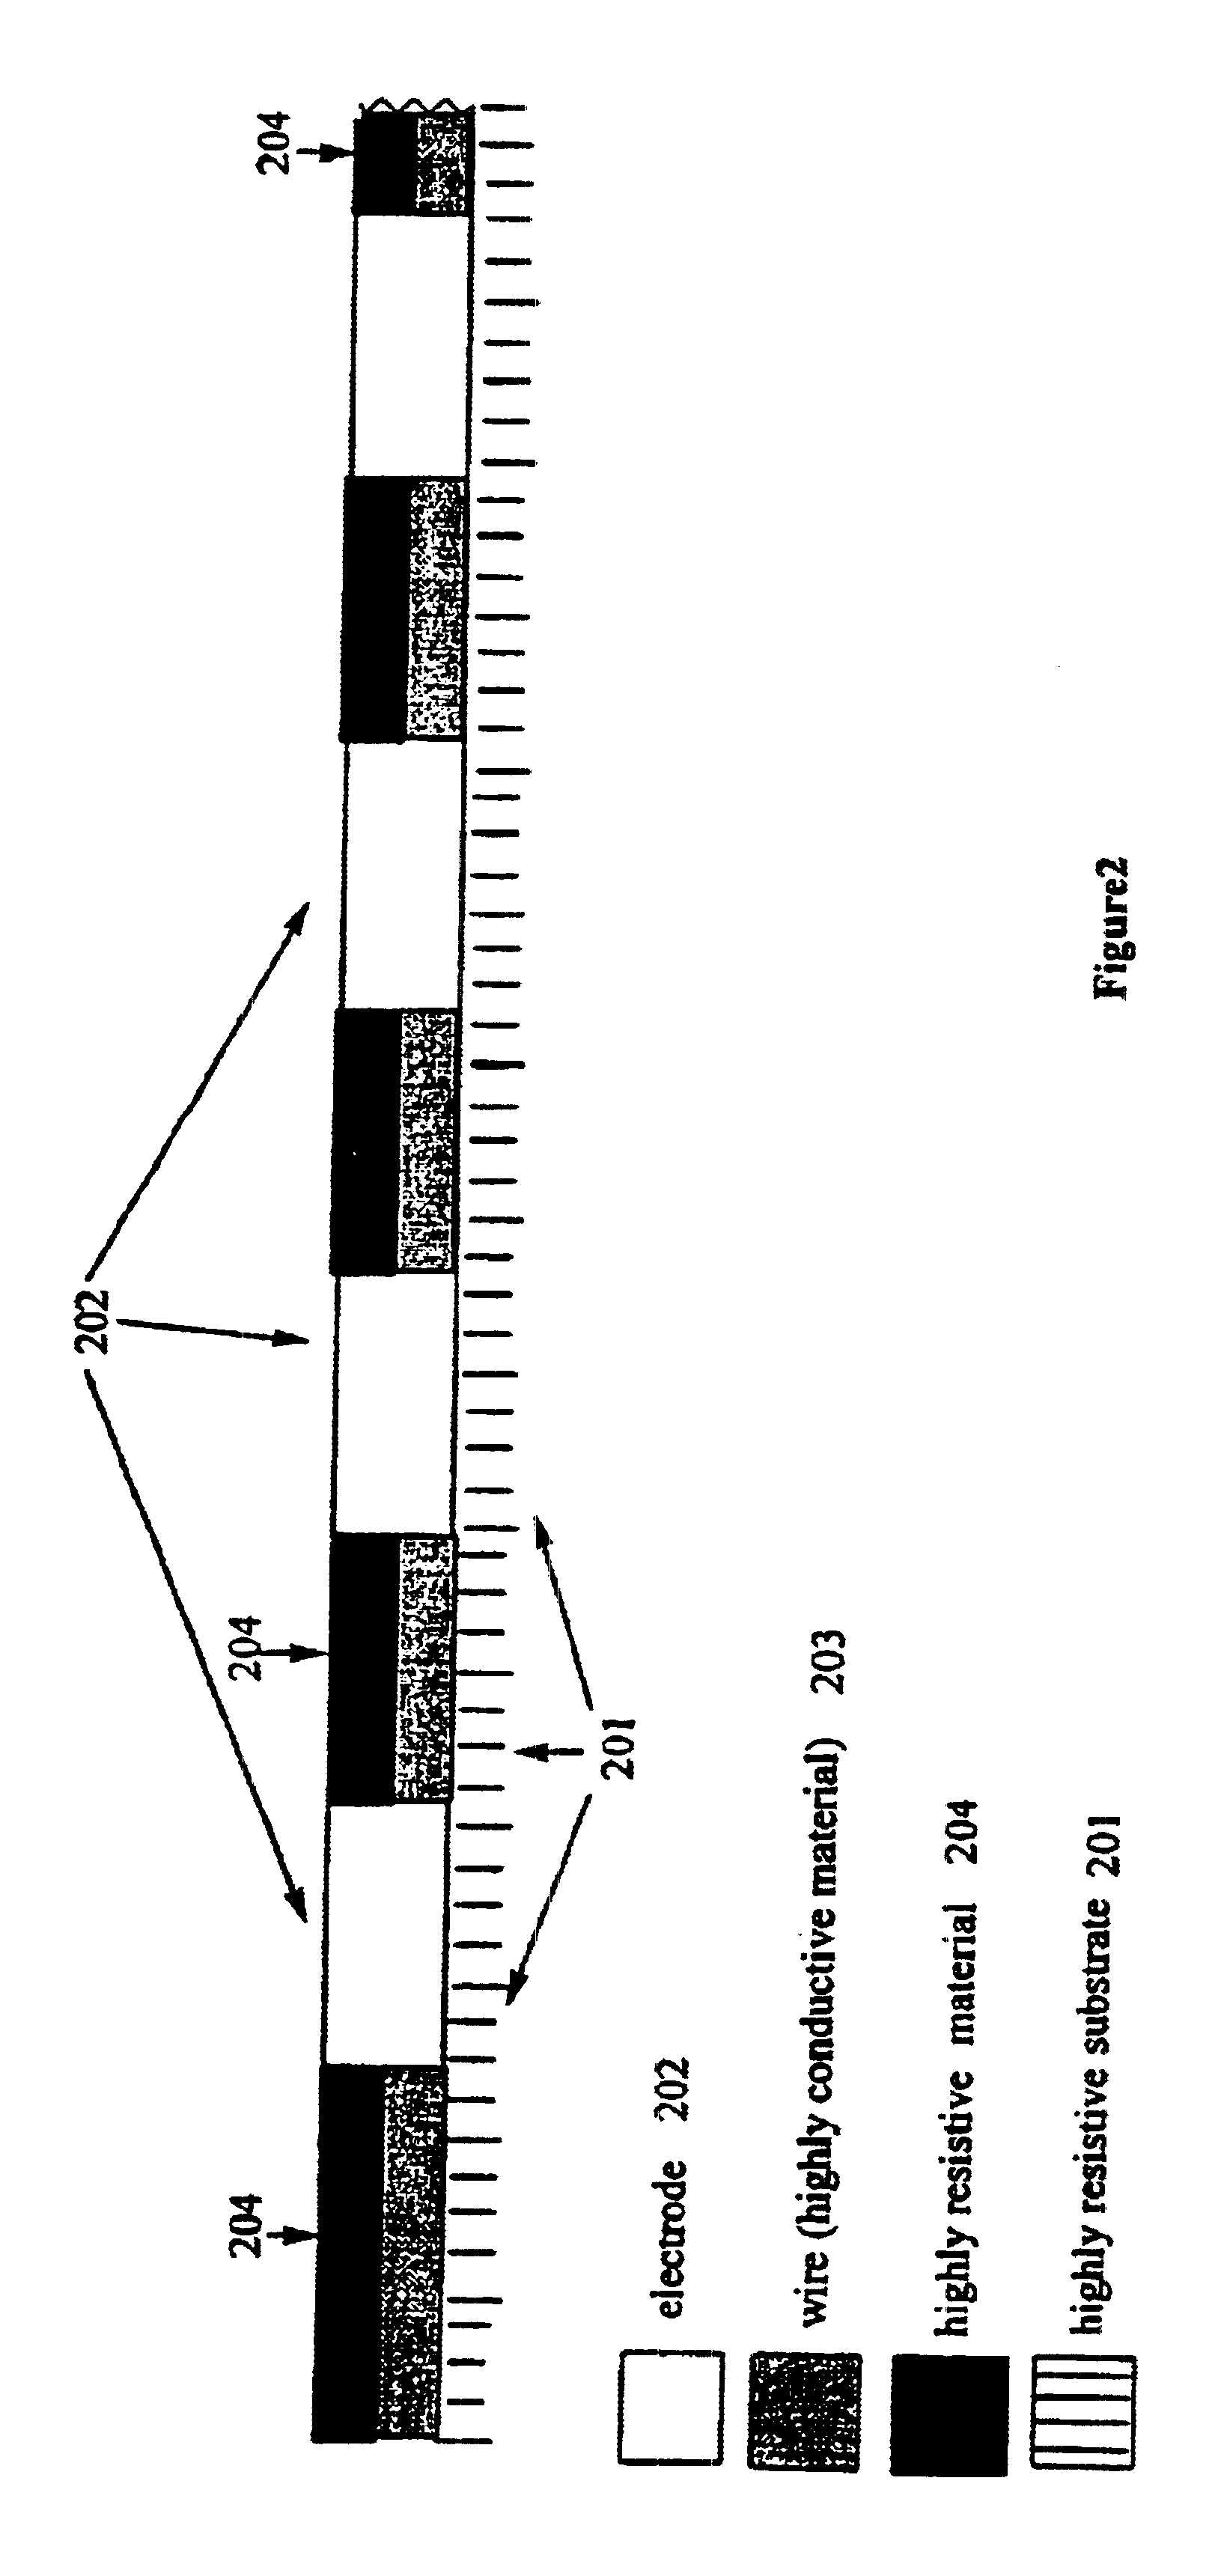 Electrode array for development and testing of materials